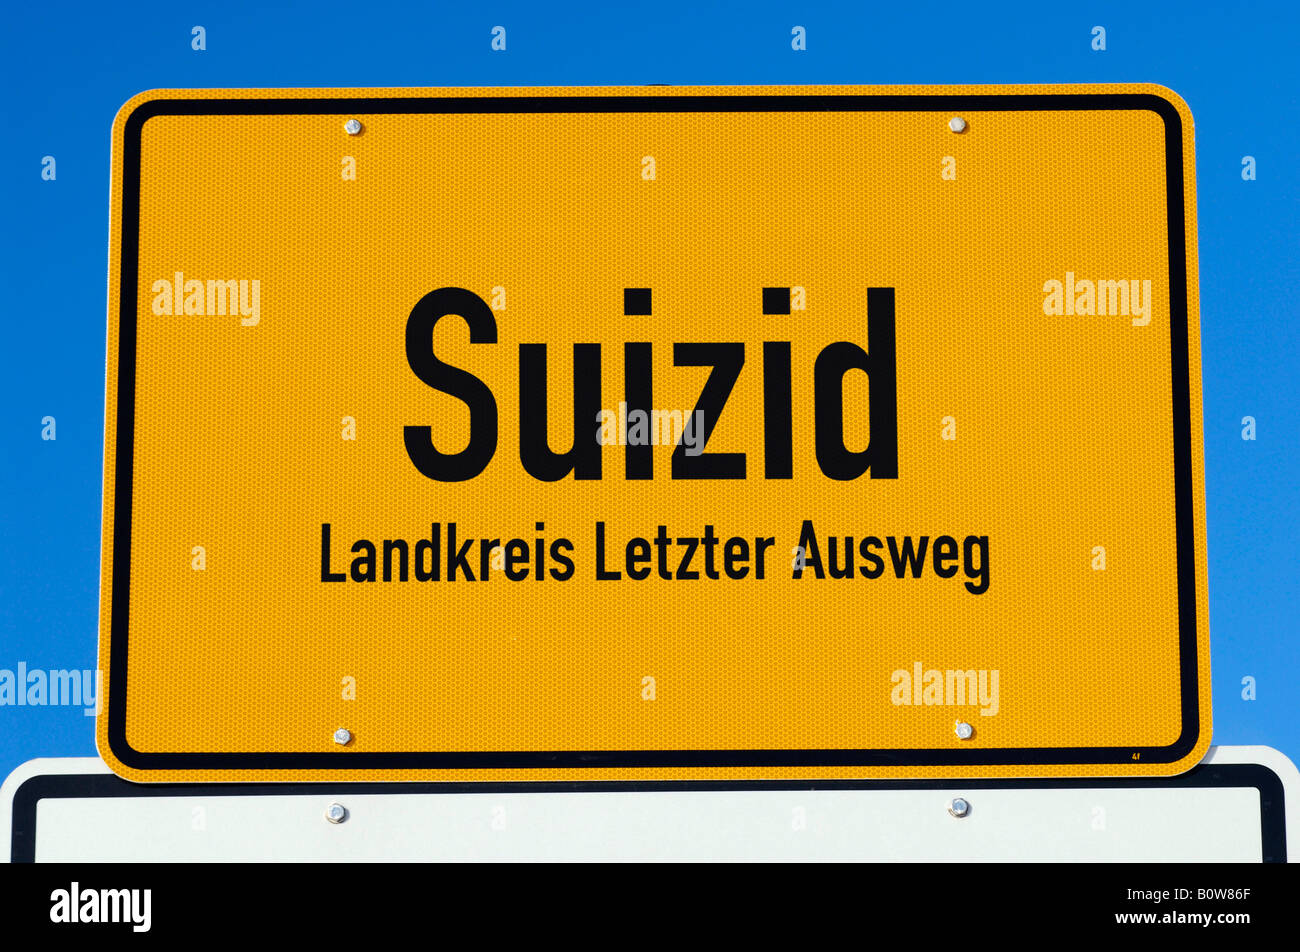 Suizid (Ger. for suicide) Stock Photo